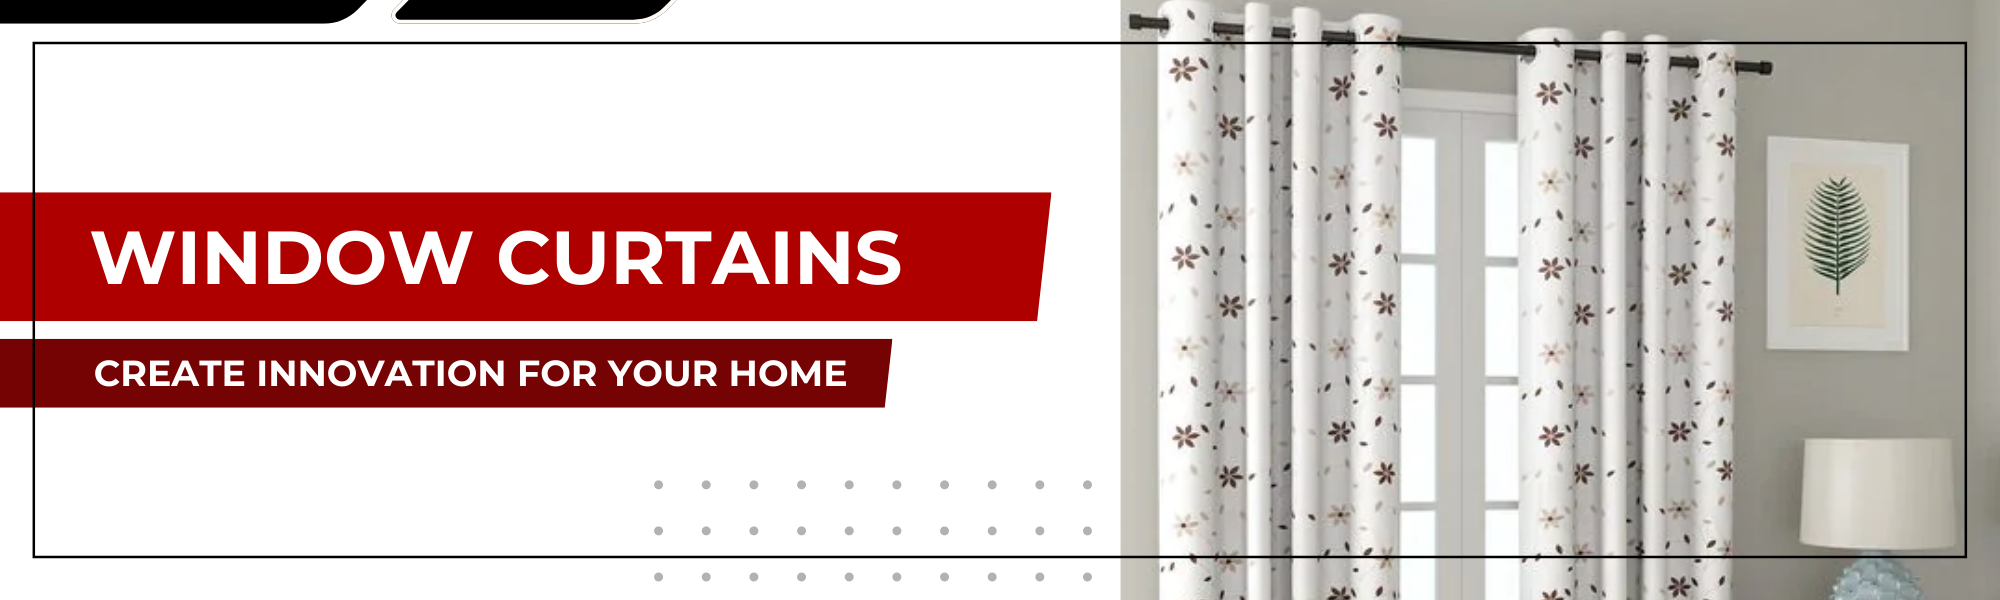 Window Curtains Online at Best Price | Install Window Curtains